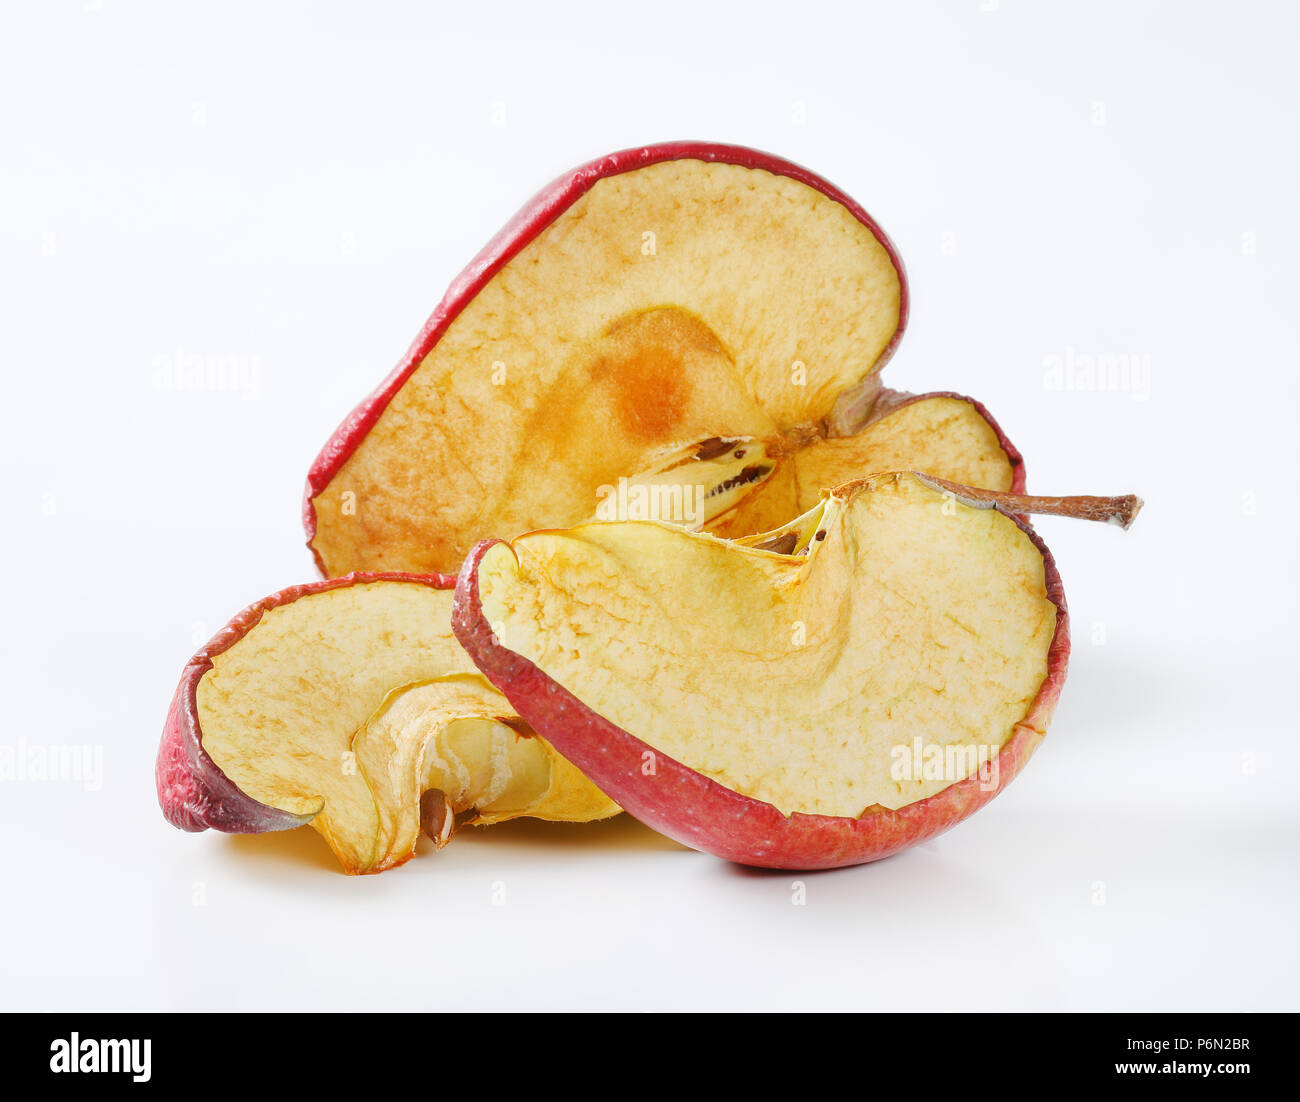 dried apple wedges on white background Stock Photo